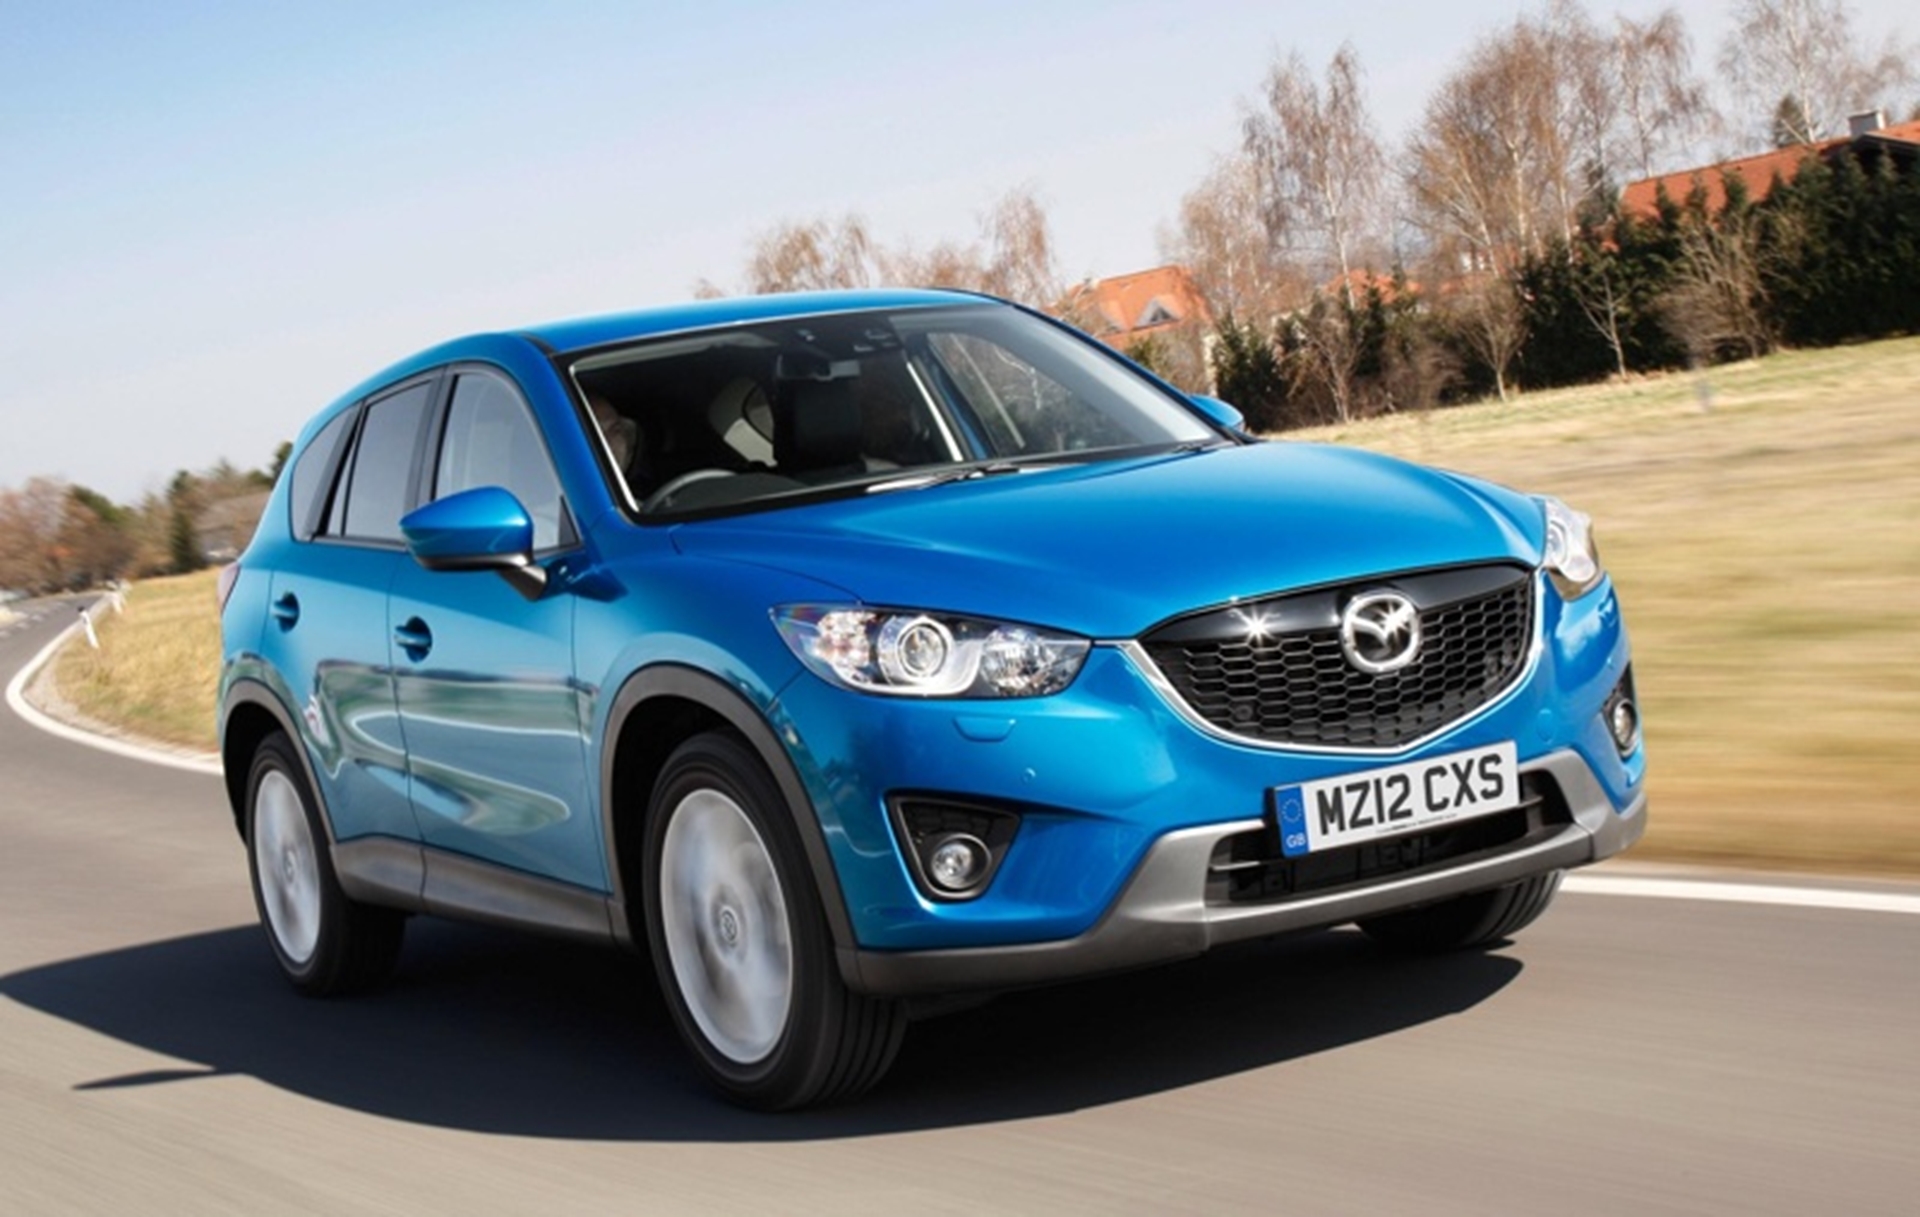 MAZDA DEFY-CONVENTION OFFER WITH ALL-NEW MAZDA CX-5